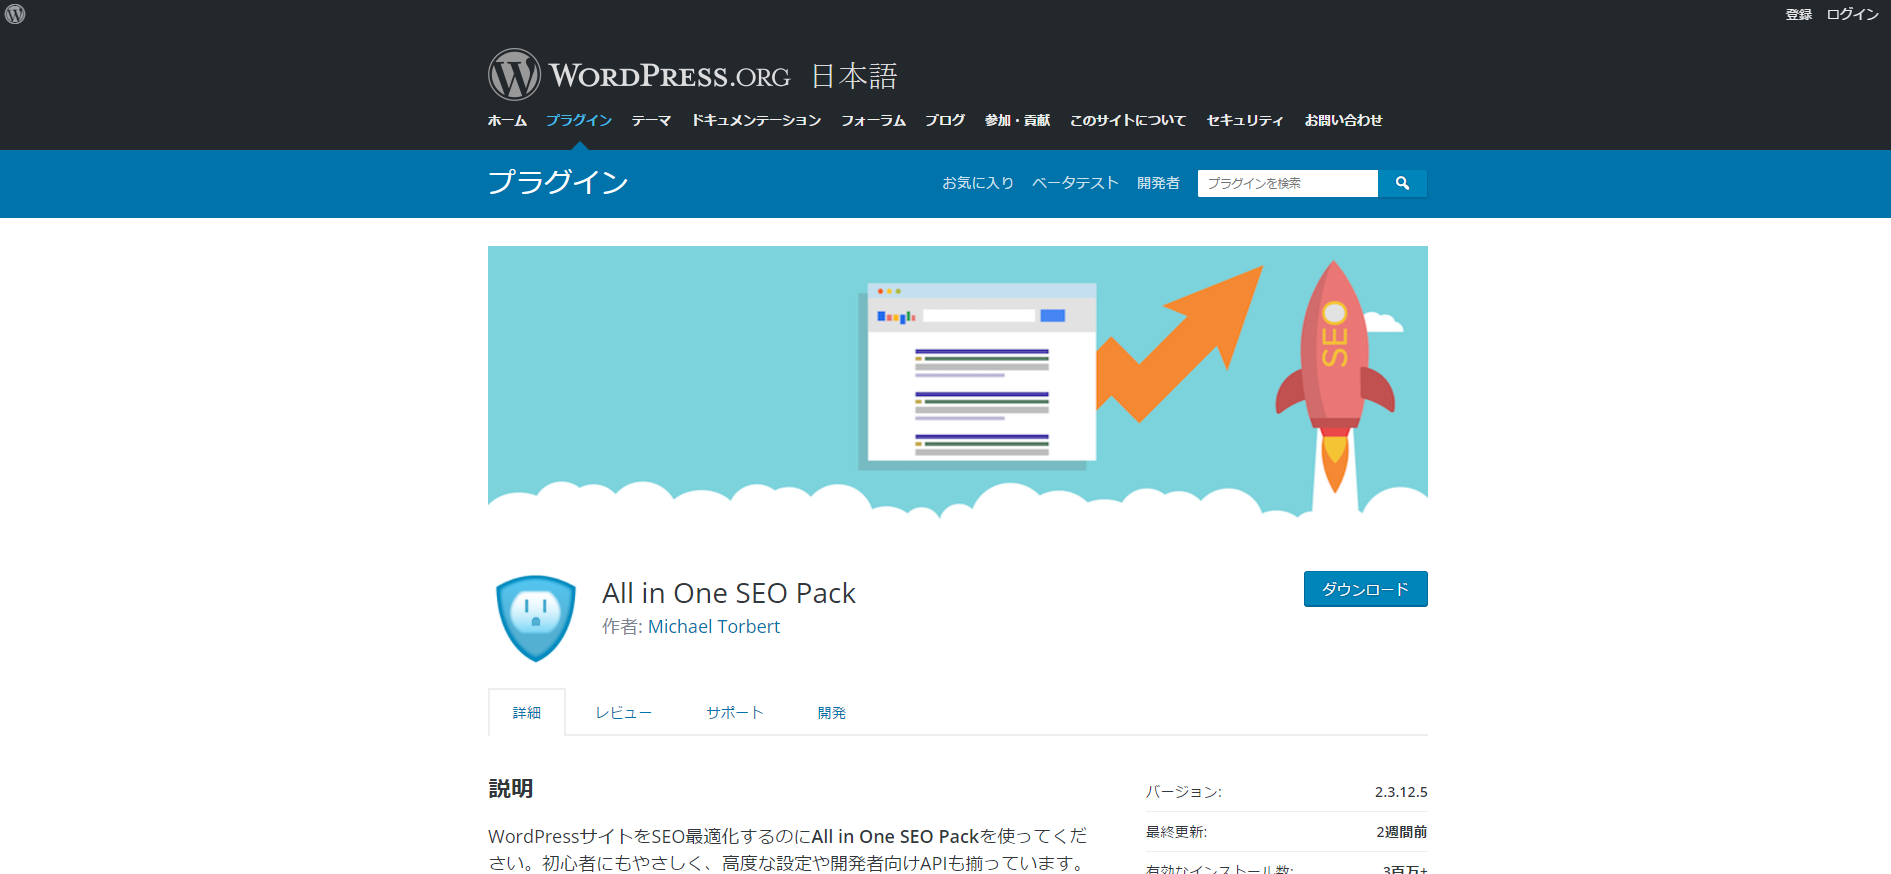 「All in One SEO Pack」の公式サイト